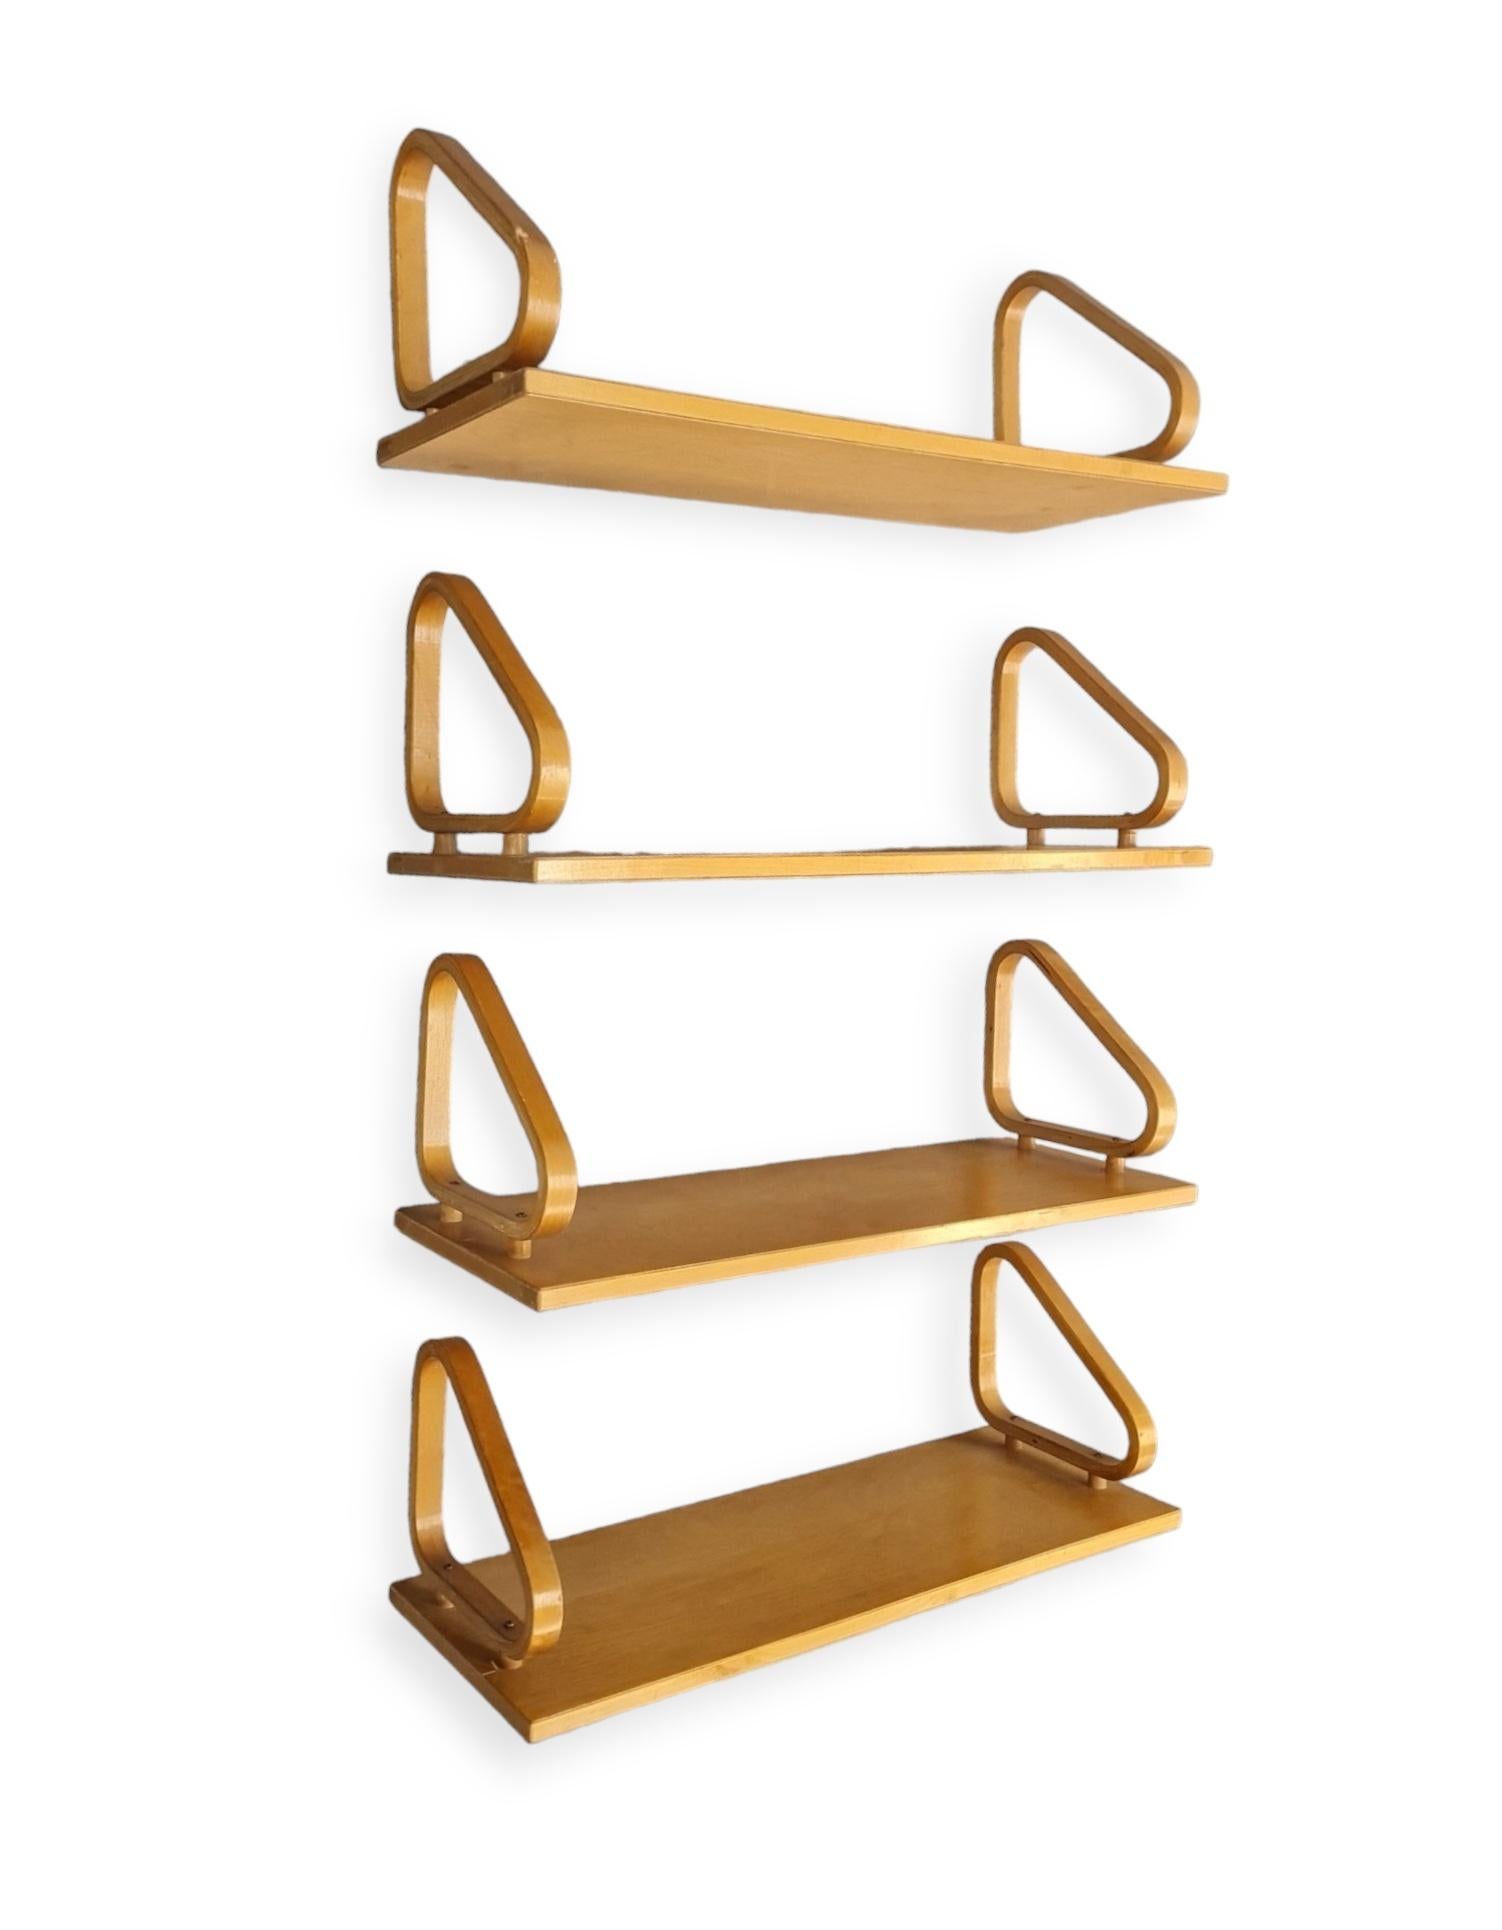 Rare Set of 4 Alvar Aalto Wall Shelves Model 112 with Pegs, 1930s.  For Sale 8